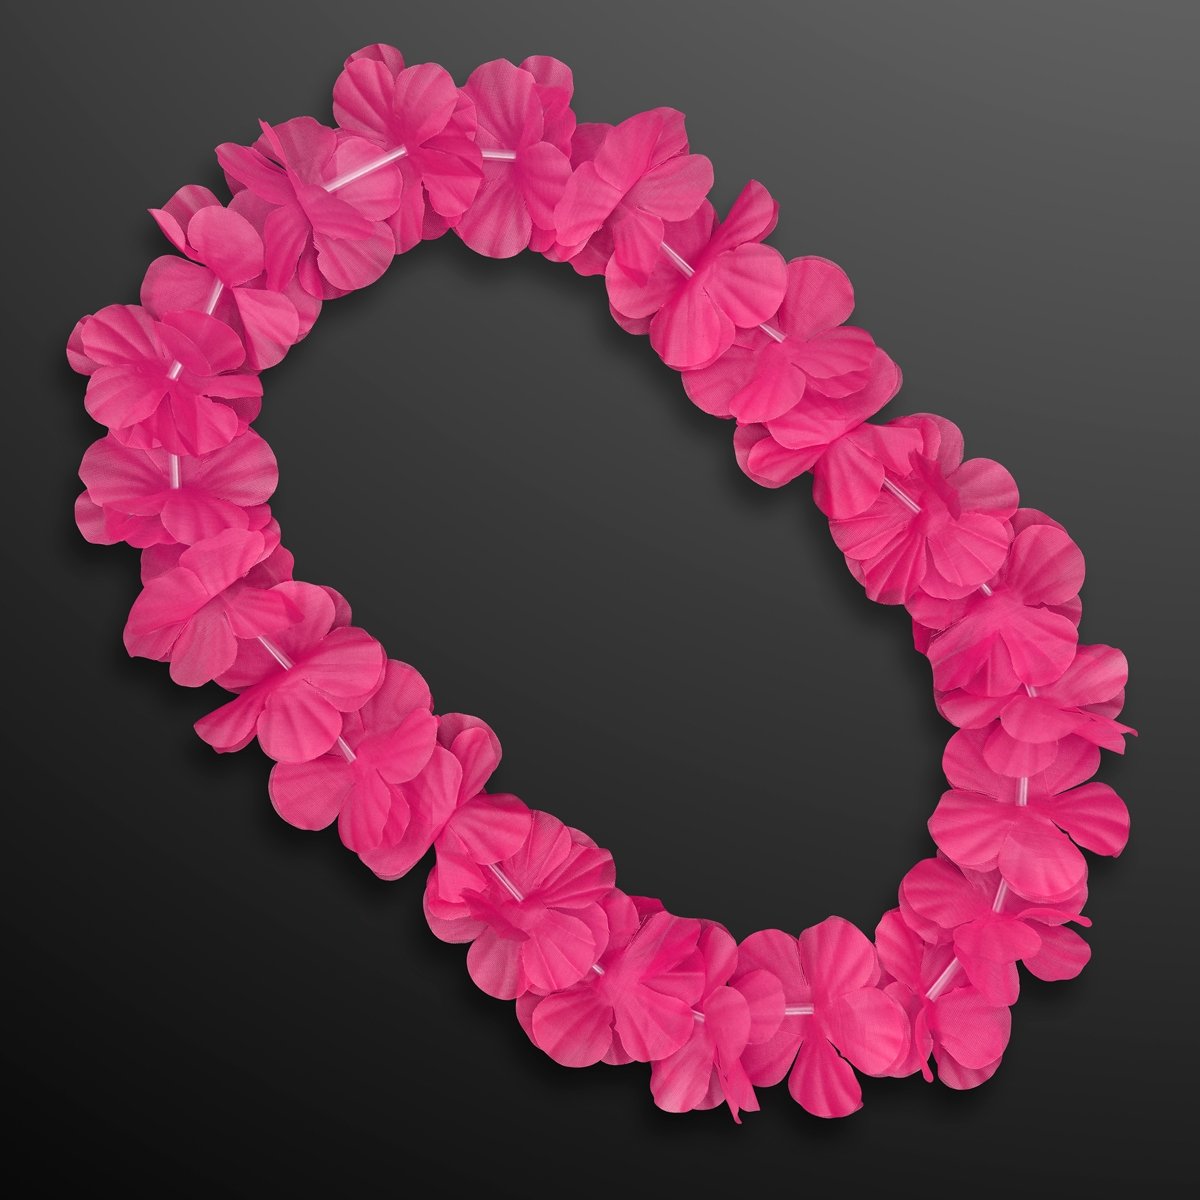 12 Pack Thickened Hawaiian Leis Floral Necklace for Hula Dance Luau Party,  Party Favors Celebrations and Decorations, Plastic : Amazon.in: Toys & Games